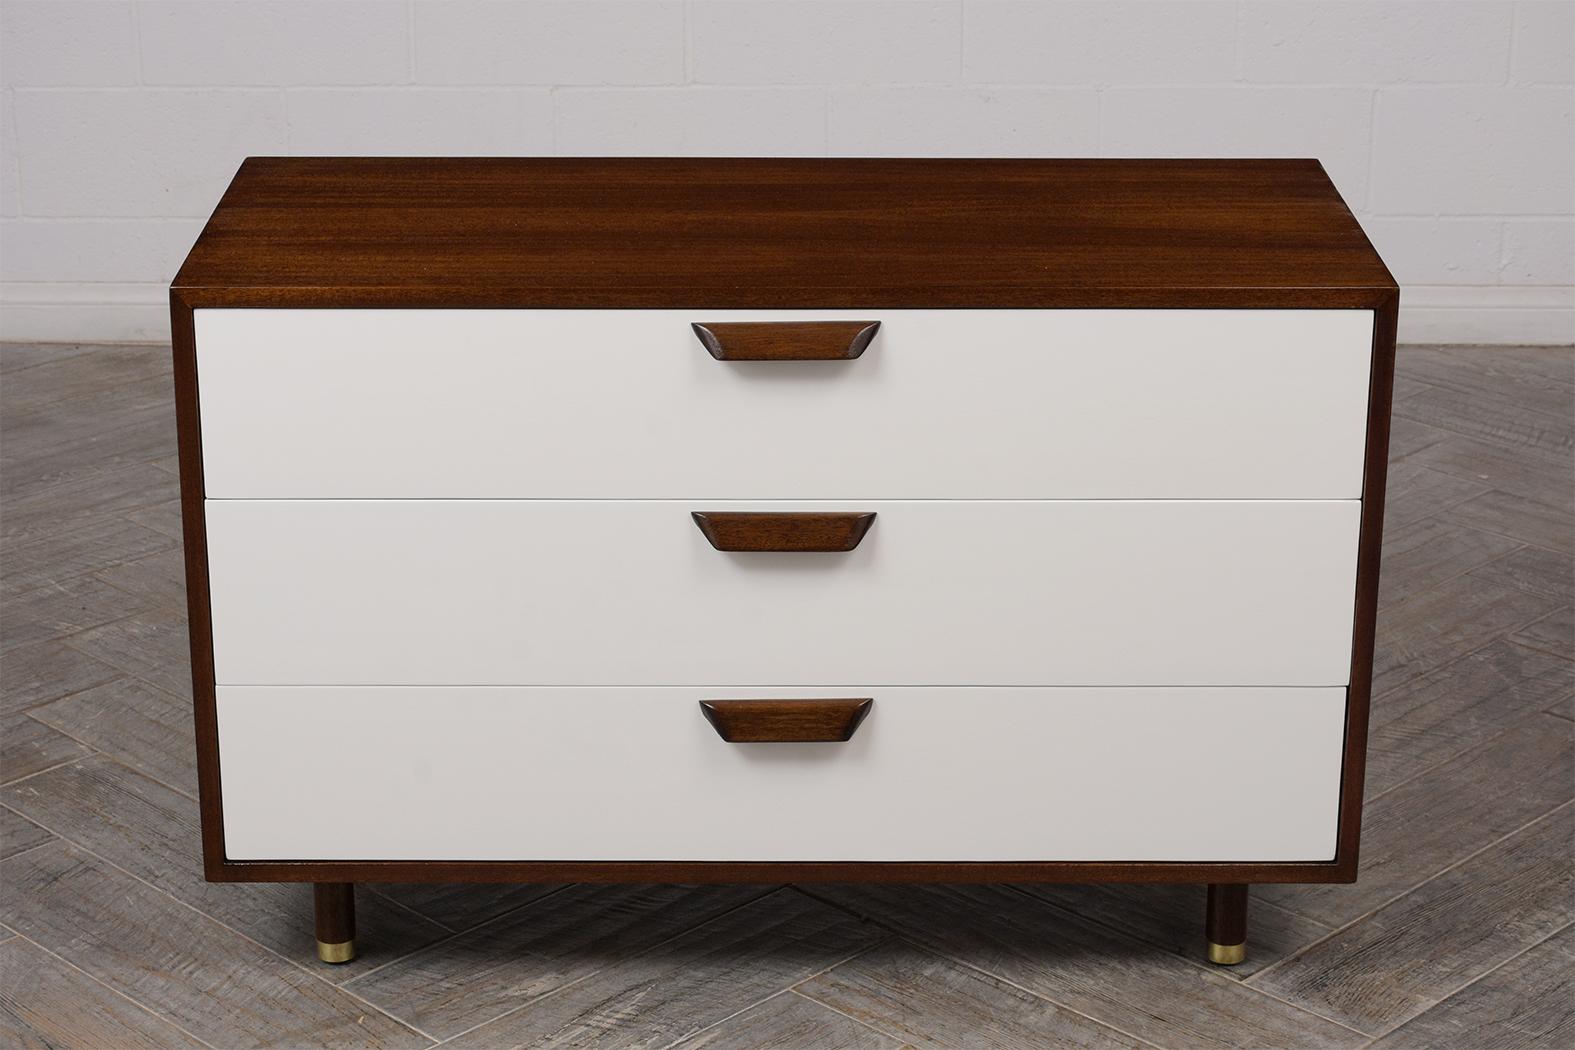 This completely restored midcentury style chest of drawers is stained in a dark walnut and white color combination with a lacquered finish. It features 3 large white drawers with walnut pulls. The chest is raised on four tapered pedestal legs with